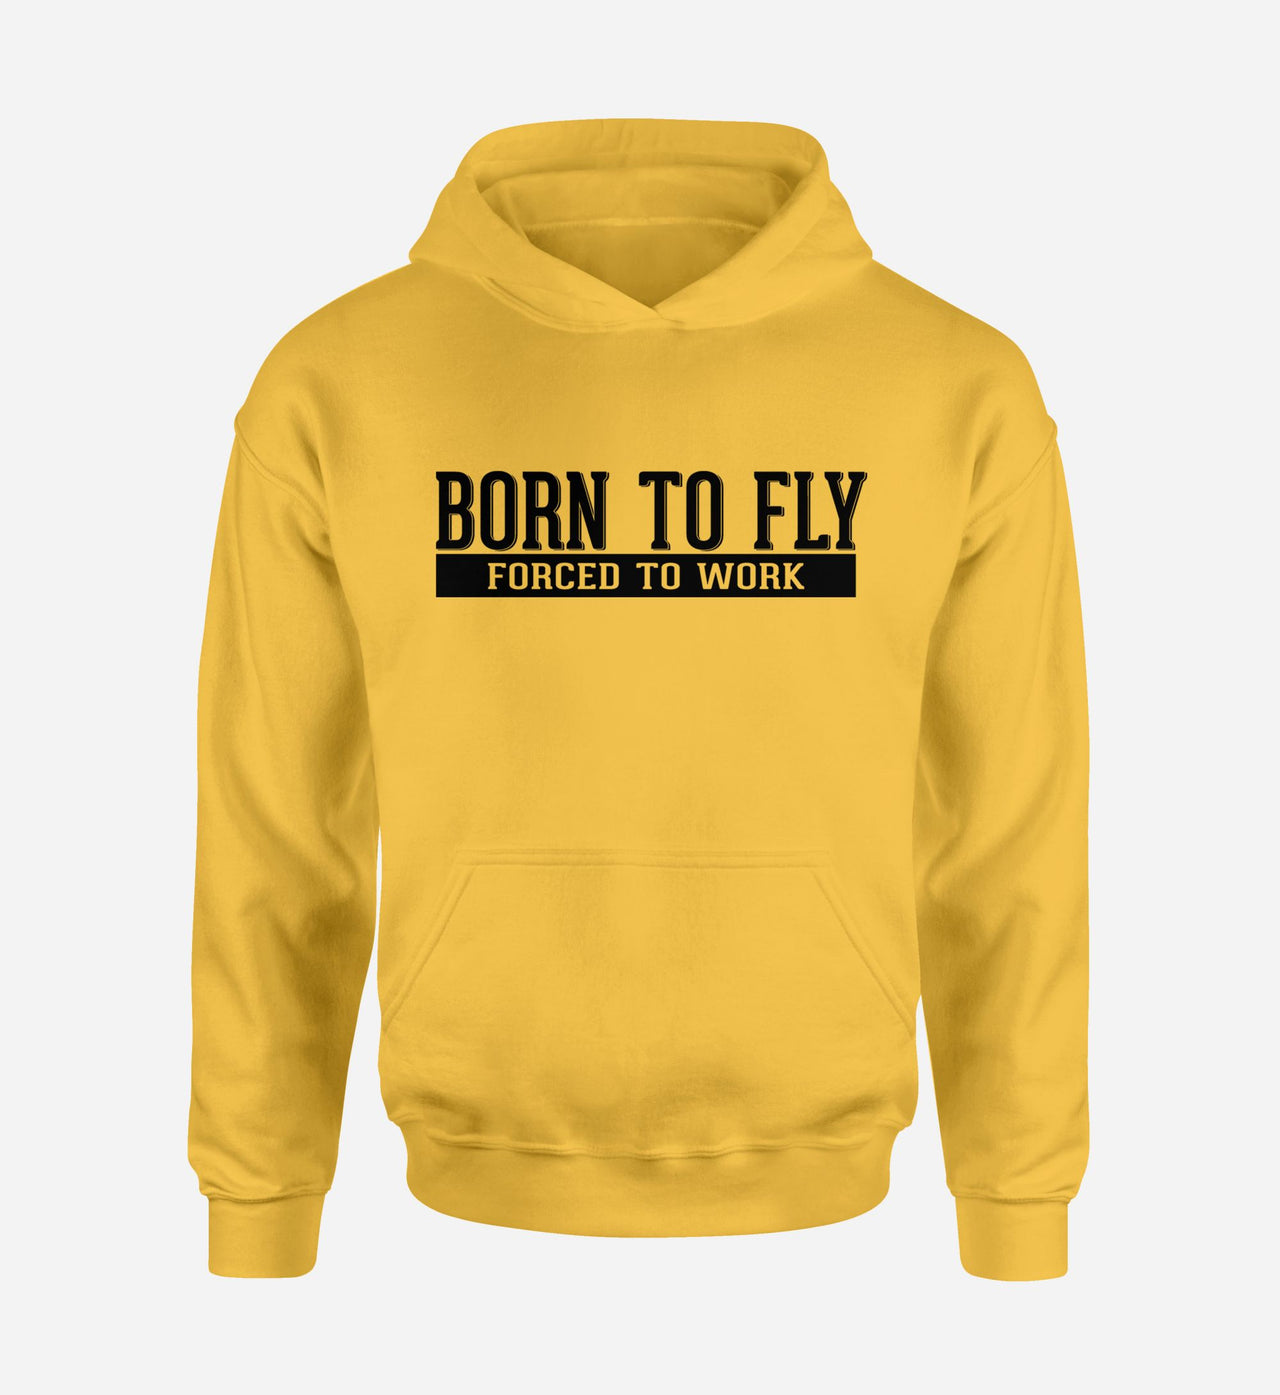 Born To Fly Forced To Work Designed Hoodies